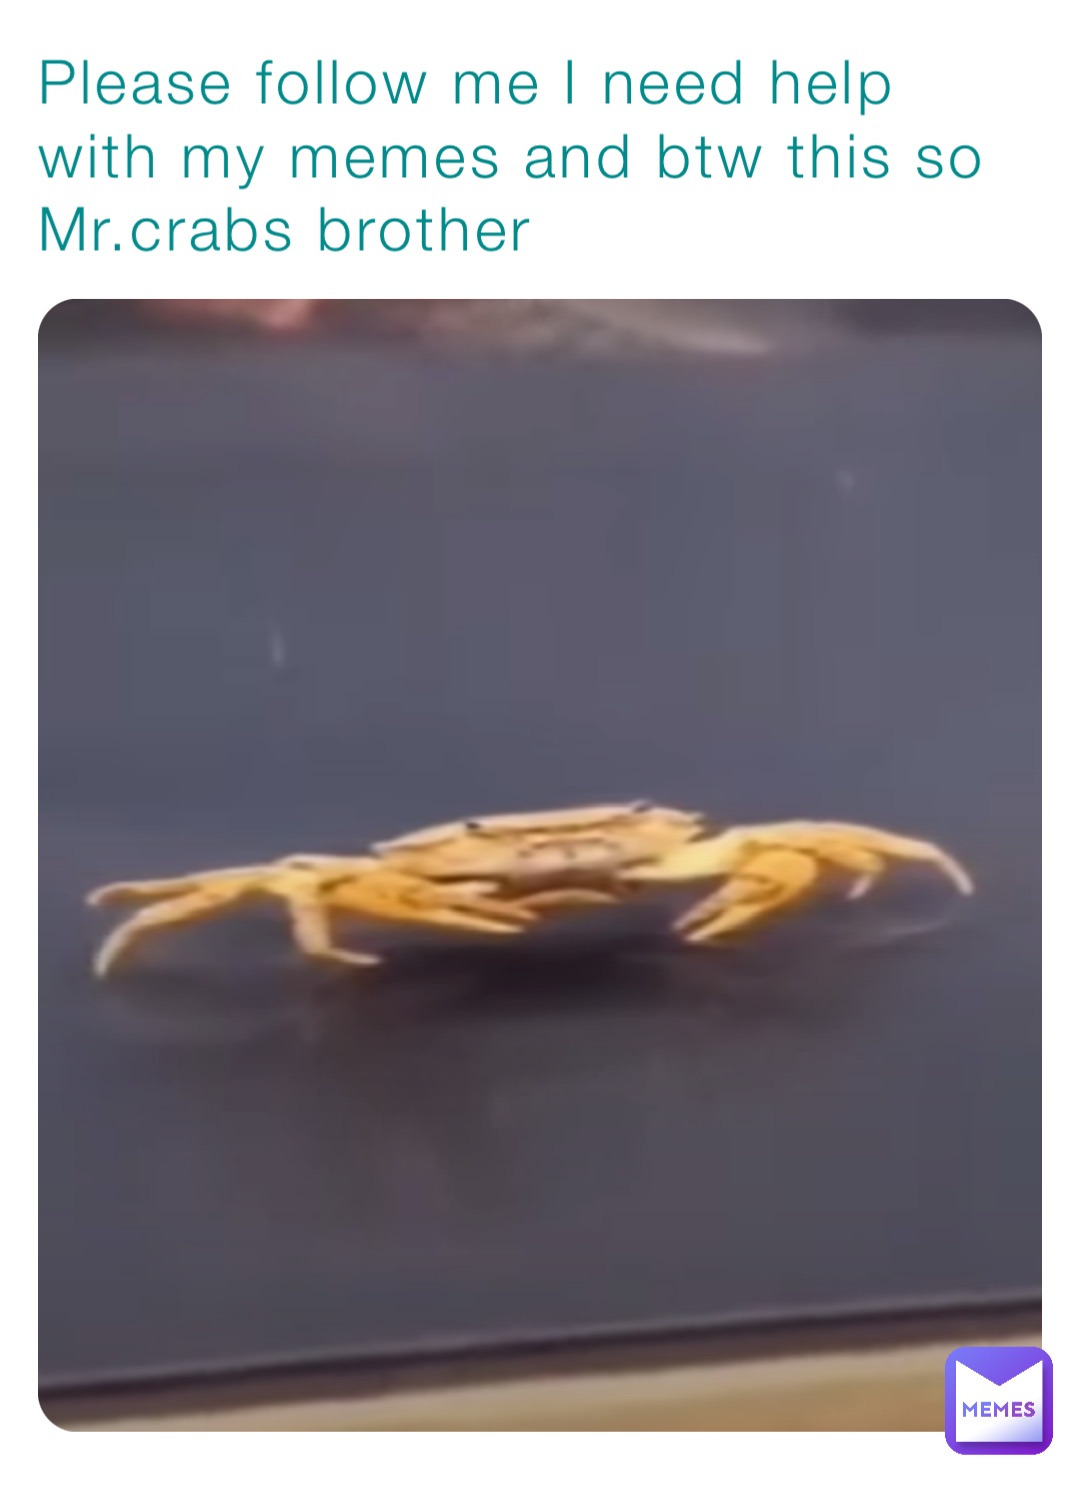 Please follow me I need help with my memes and btw this so Mr.crabs brother